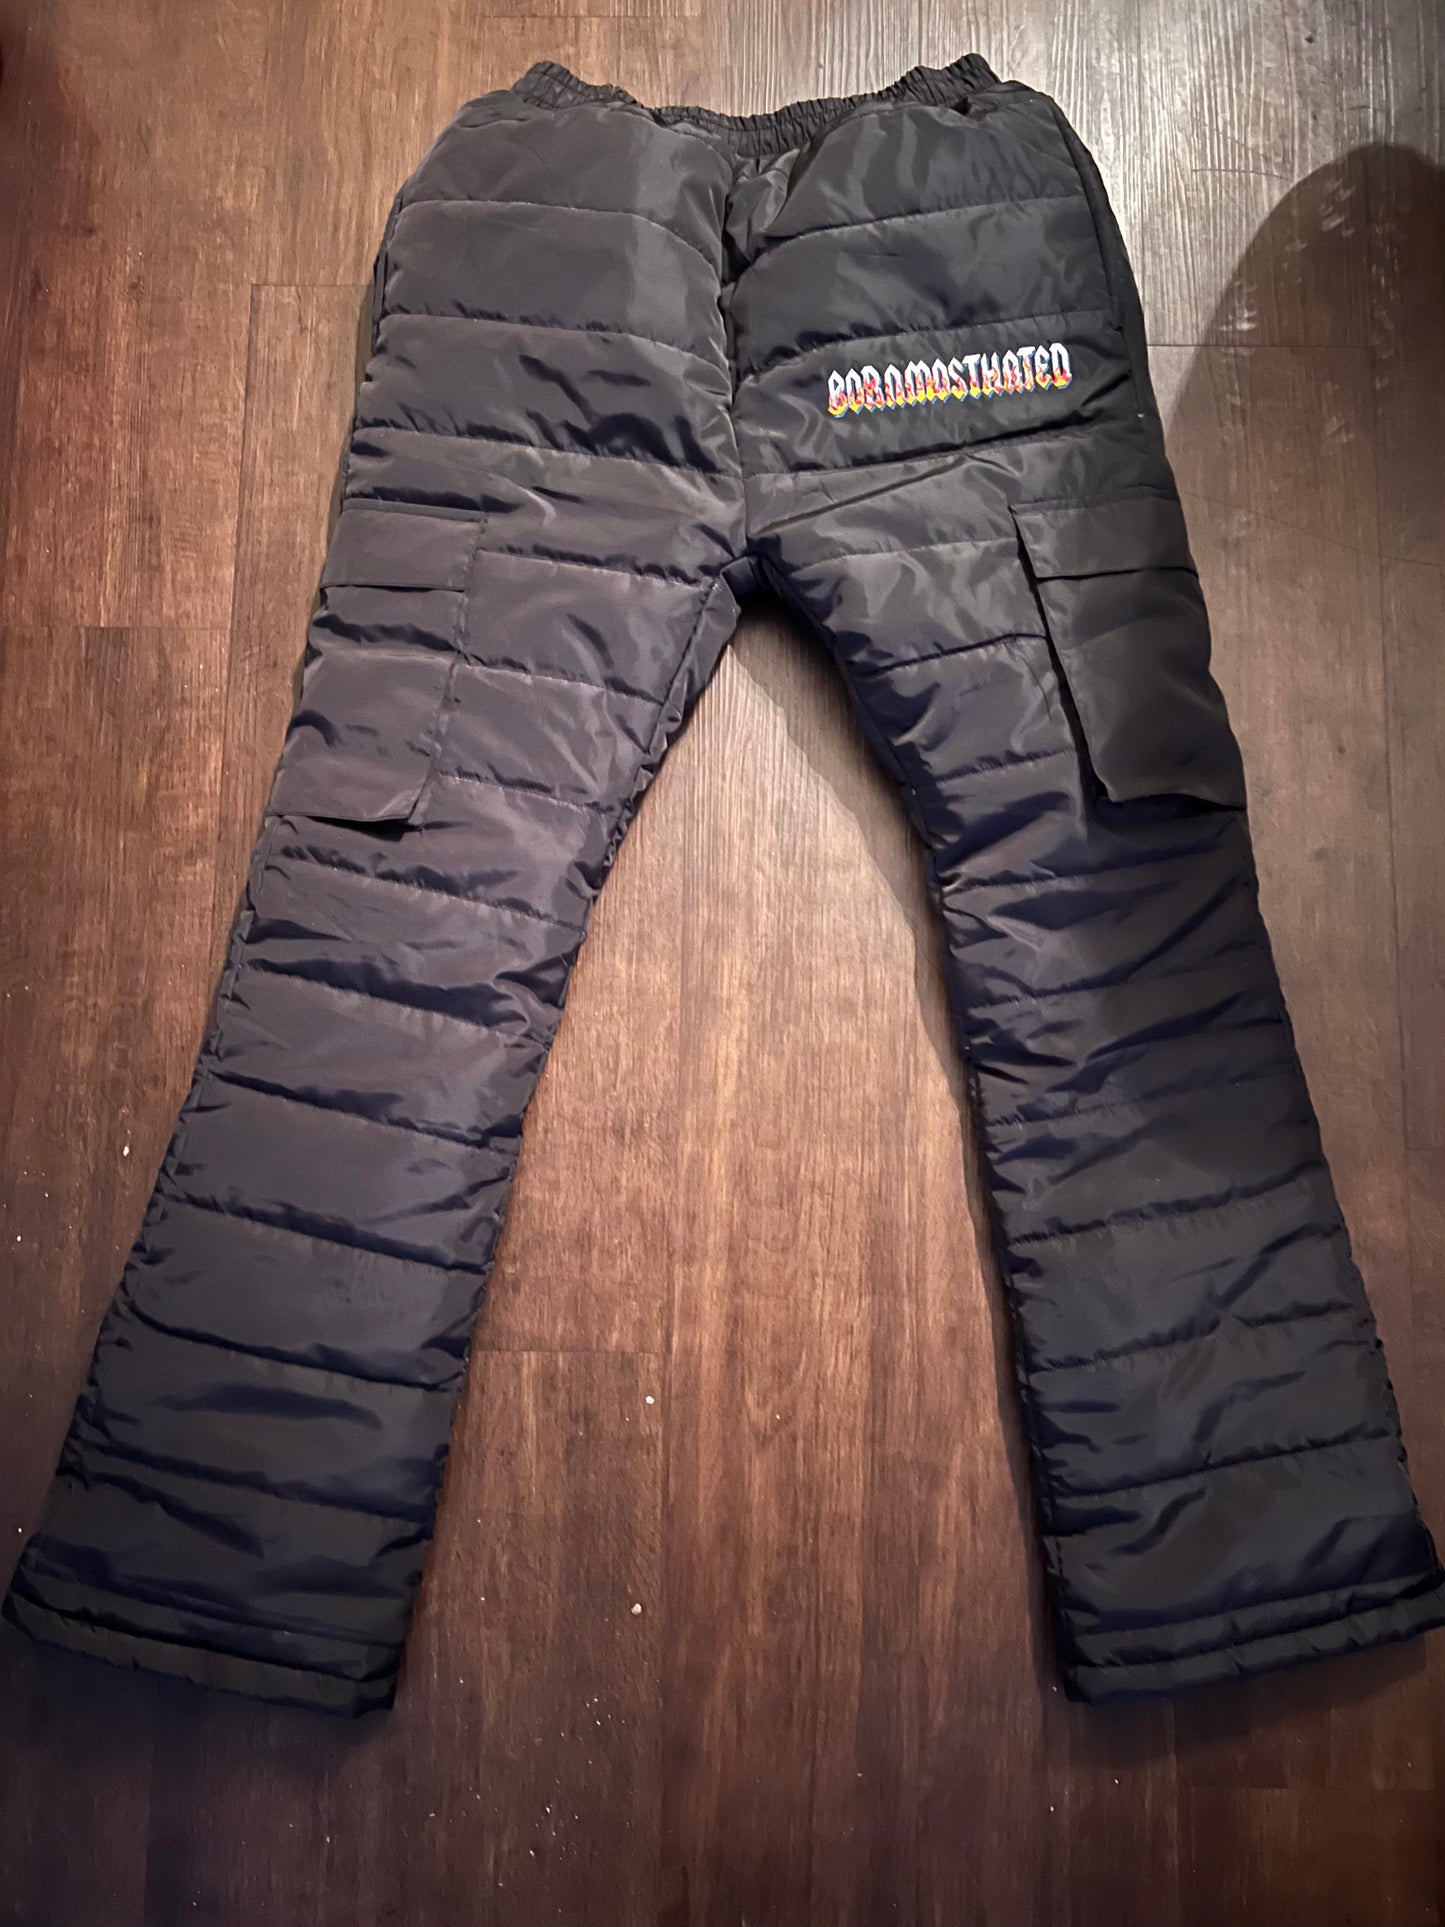 BORNMOSTHATED PUFFER PANTS – DropZone